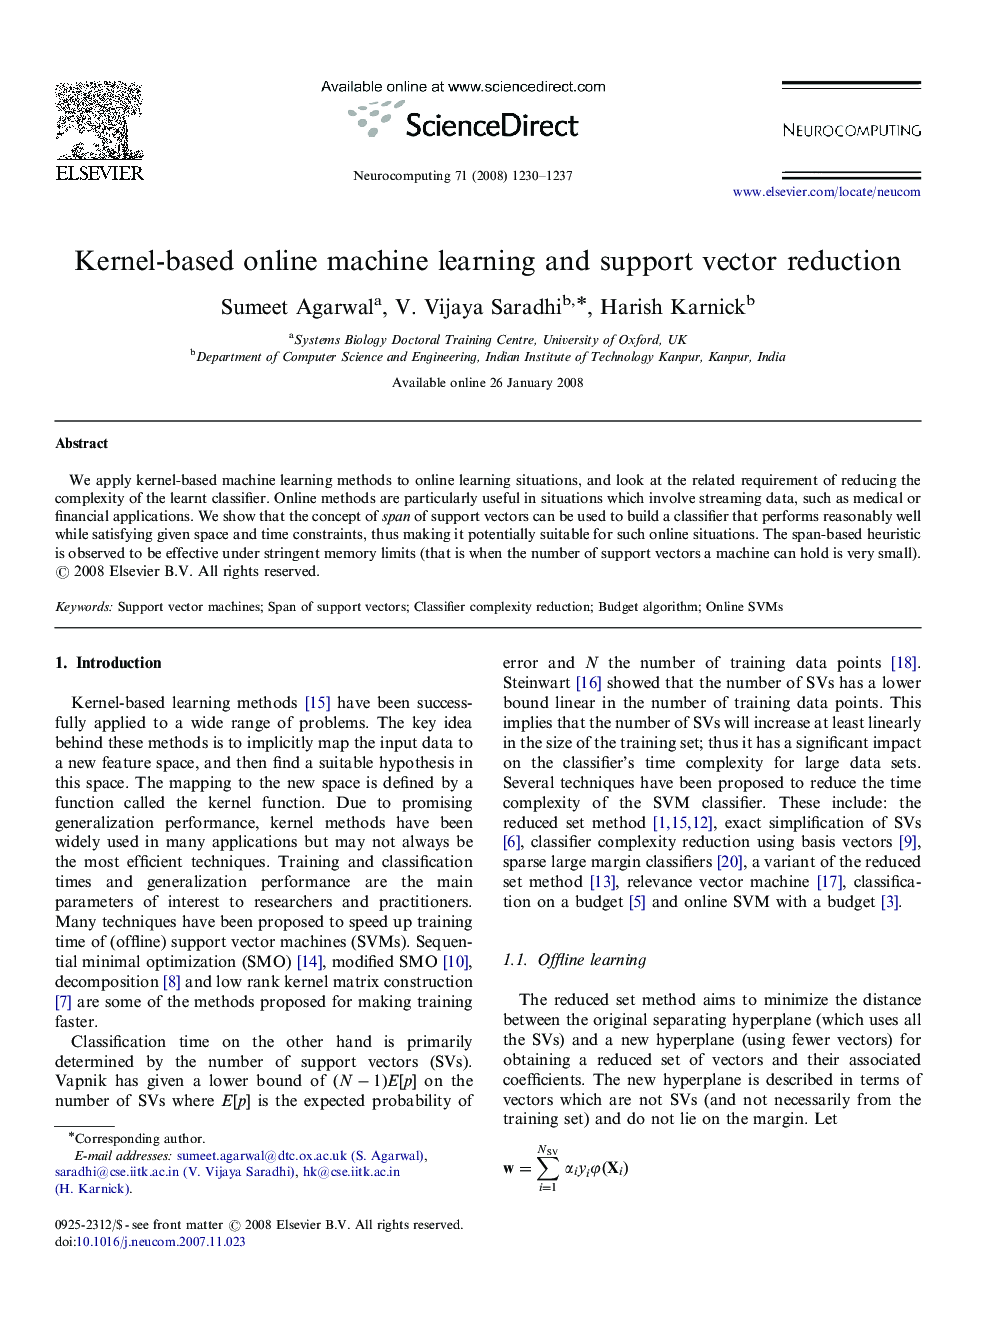 Kernel-based online machine learning and support vector reduction